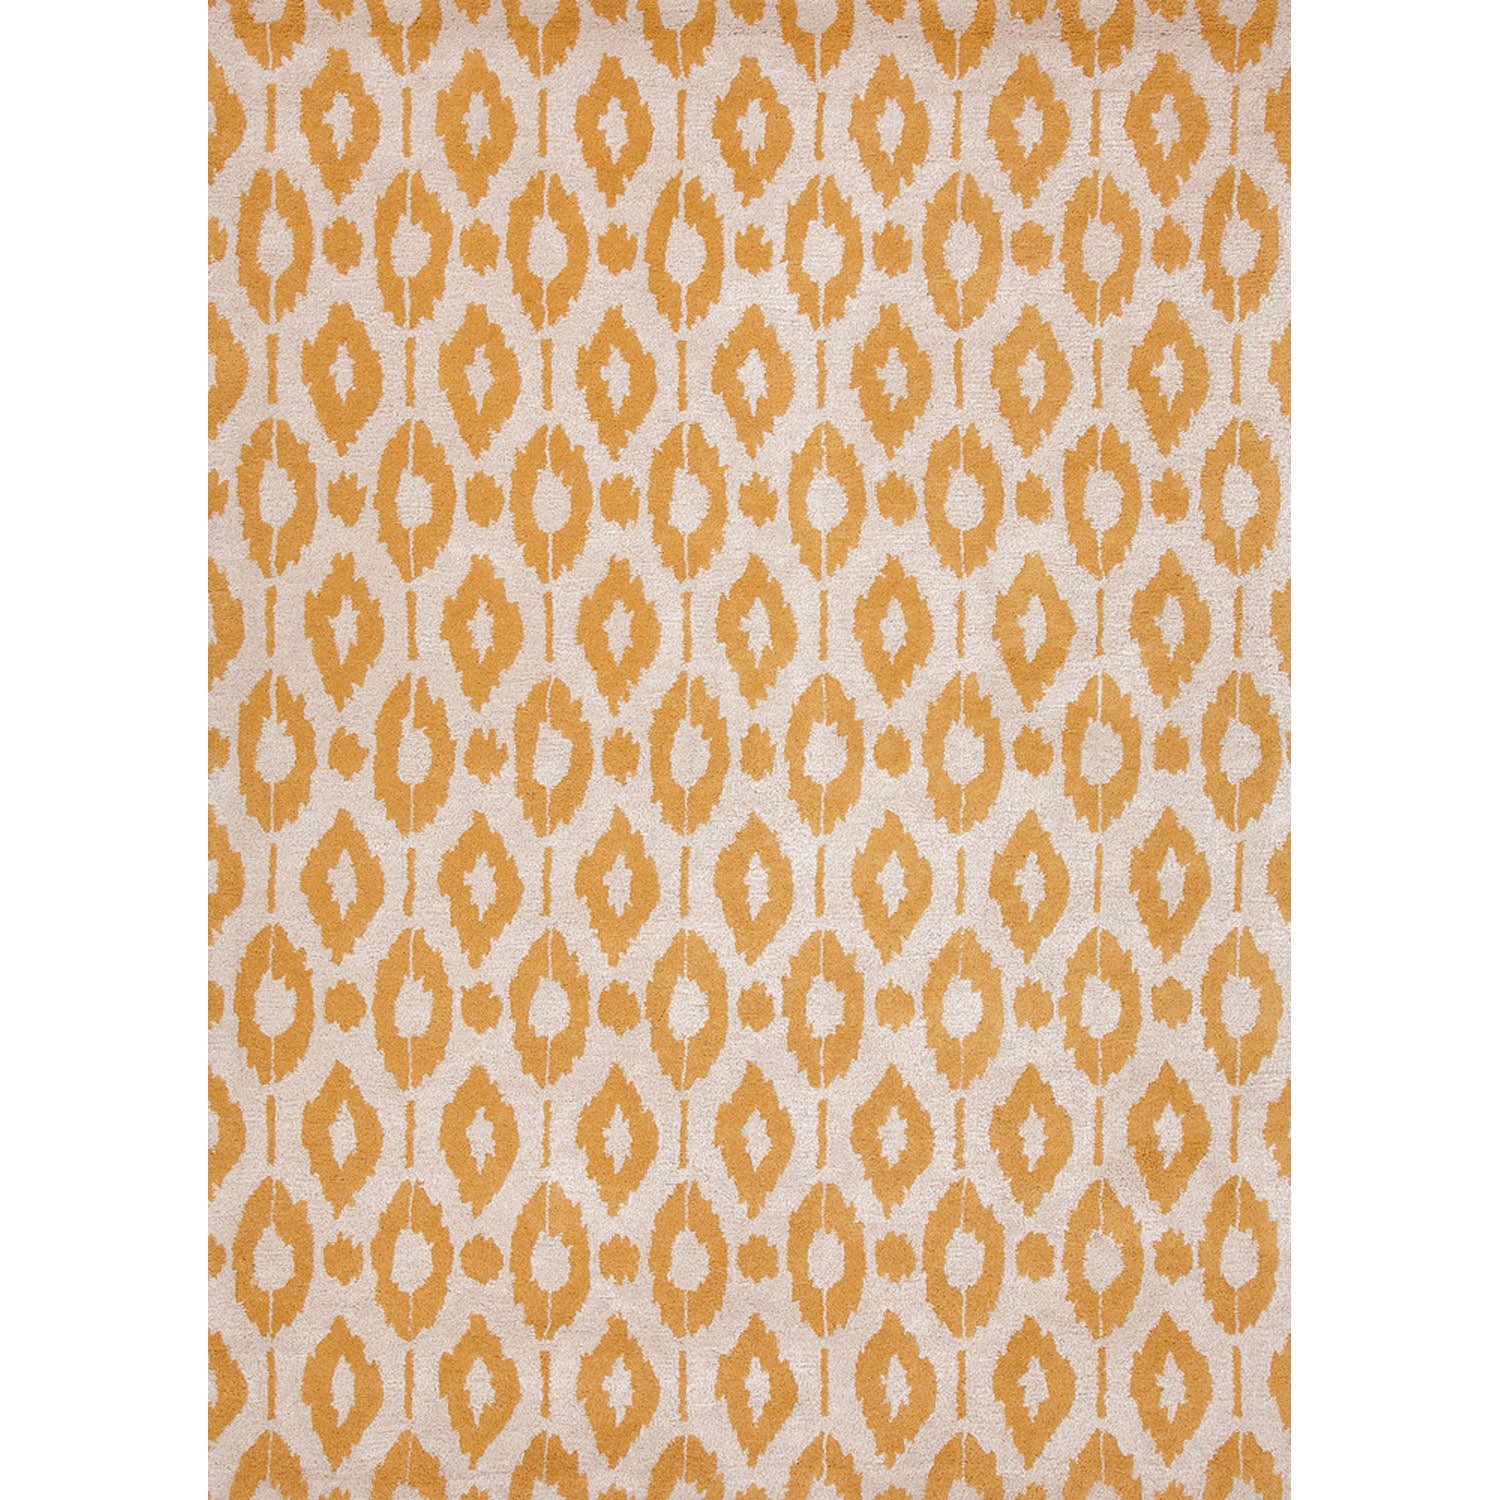 Hand tufted Contemporary Geometric Pattern Yellow Rug (8 X 11)